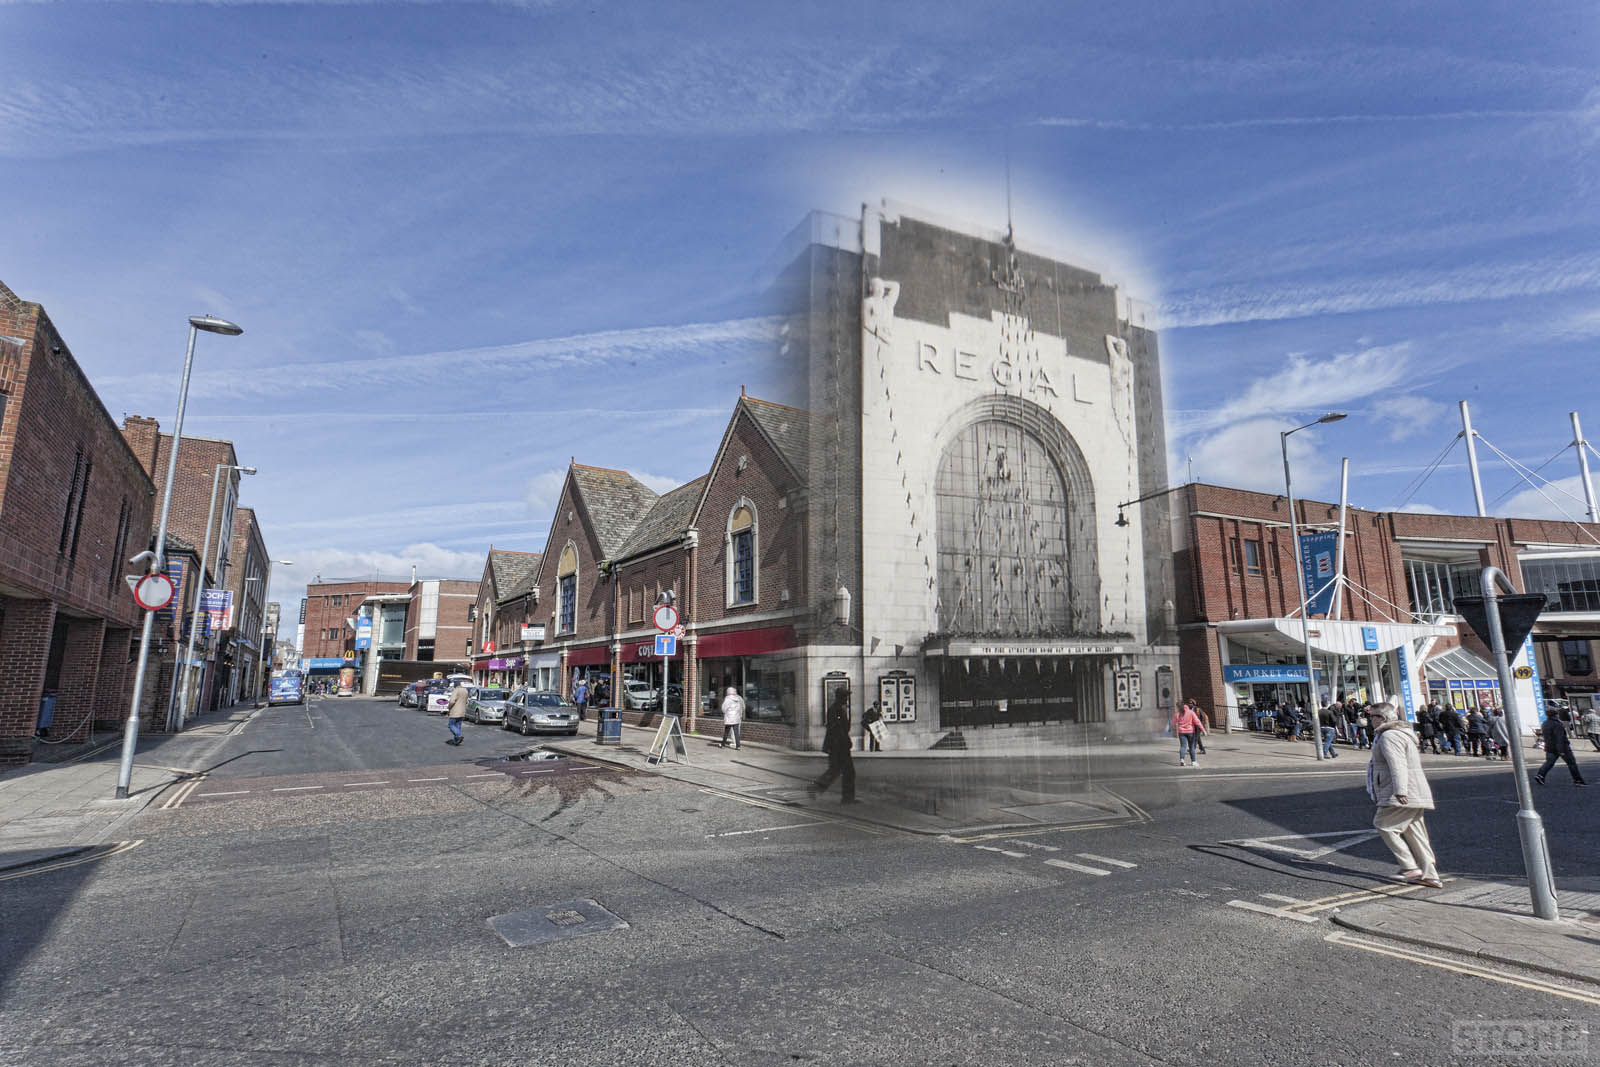 Cinema ghosts: Great Yarmouth Regal & Theatre